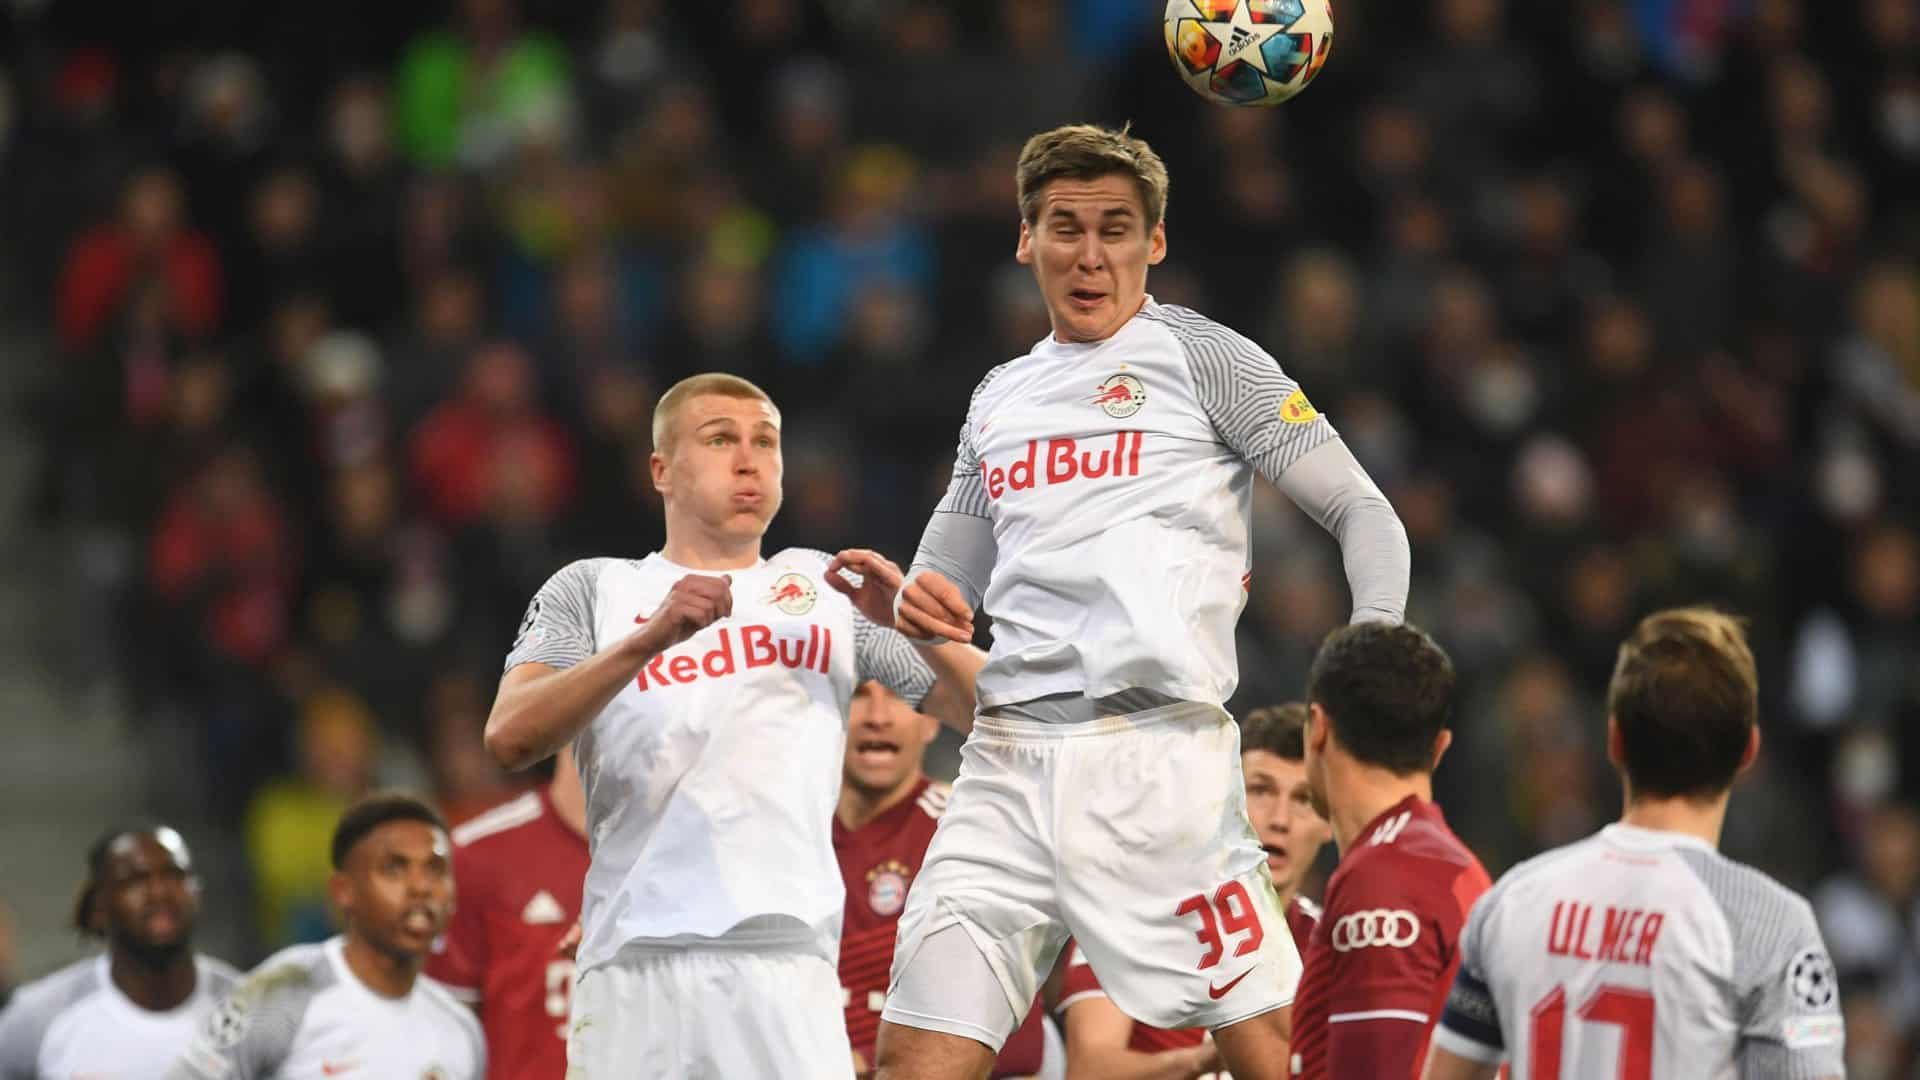 Rasmus Kristensen and Maxi Wober challenging for an aerial ball at their old, taurine obsessed club. They're wearing all white kits with 'Red Bull' across the chest, so maybe if you squint into an alternate reality... actually let's not go there